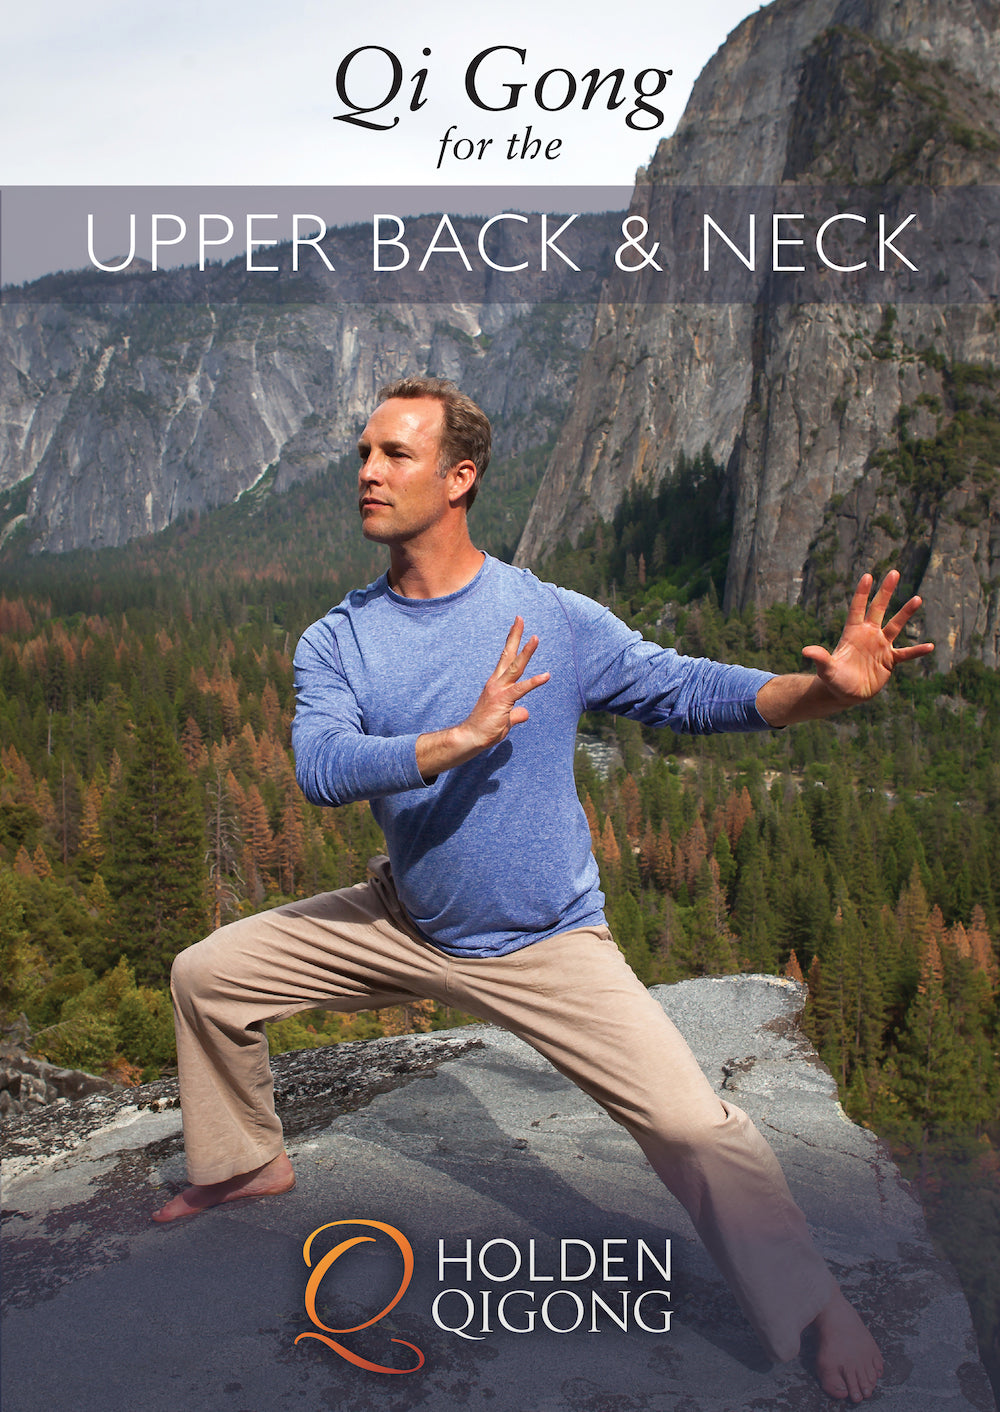 Qi Gong for the Upper Back and Neck DVD with Lee Holden - Budovideos Inc